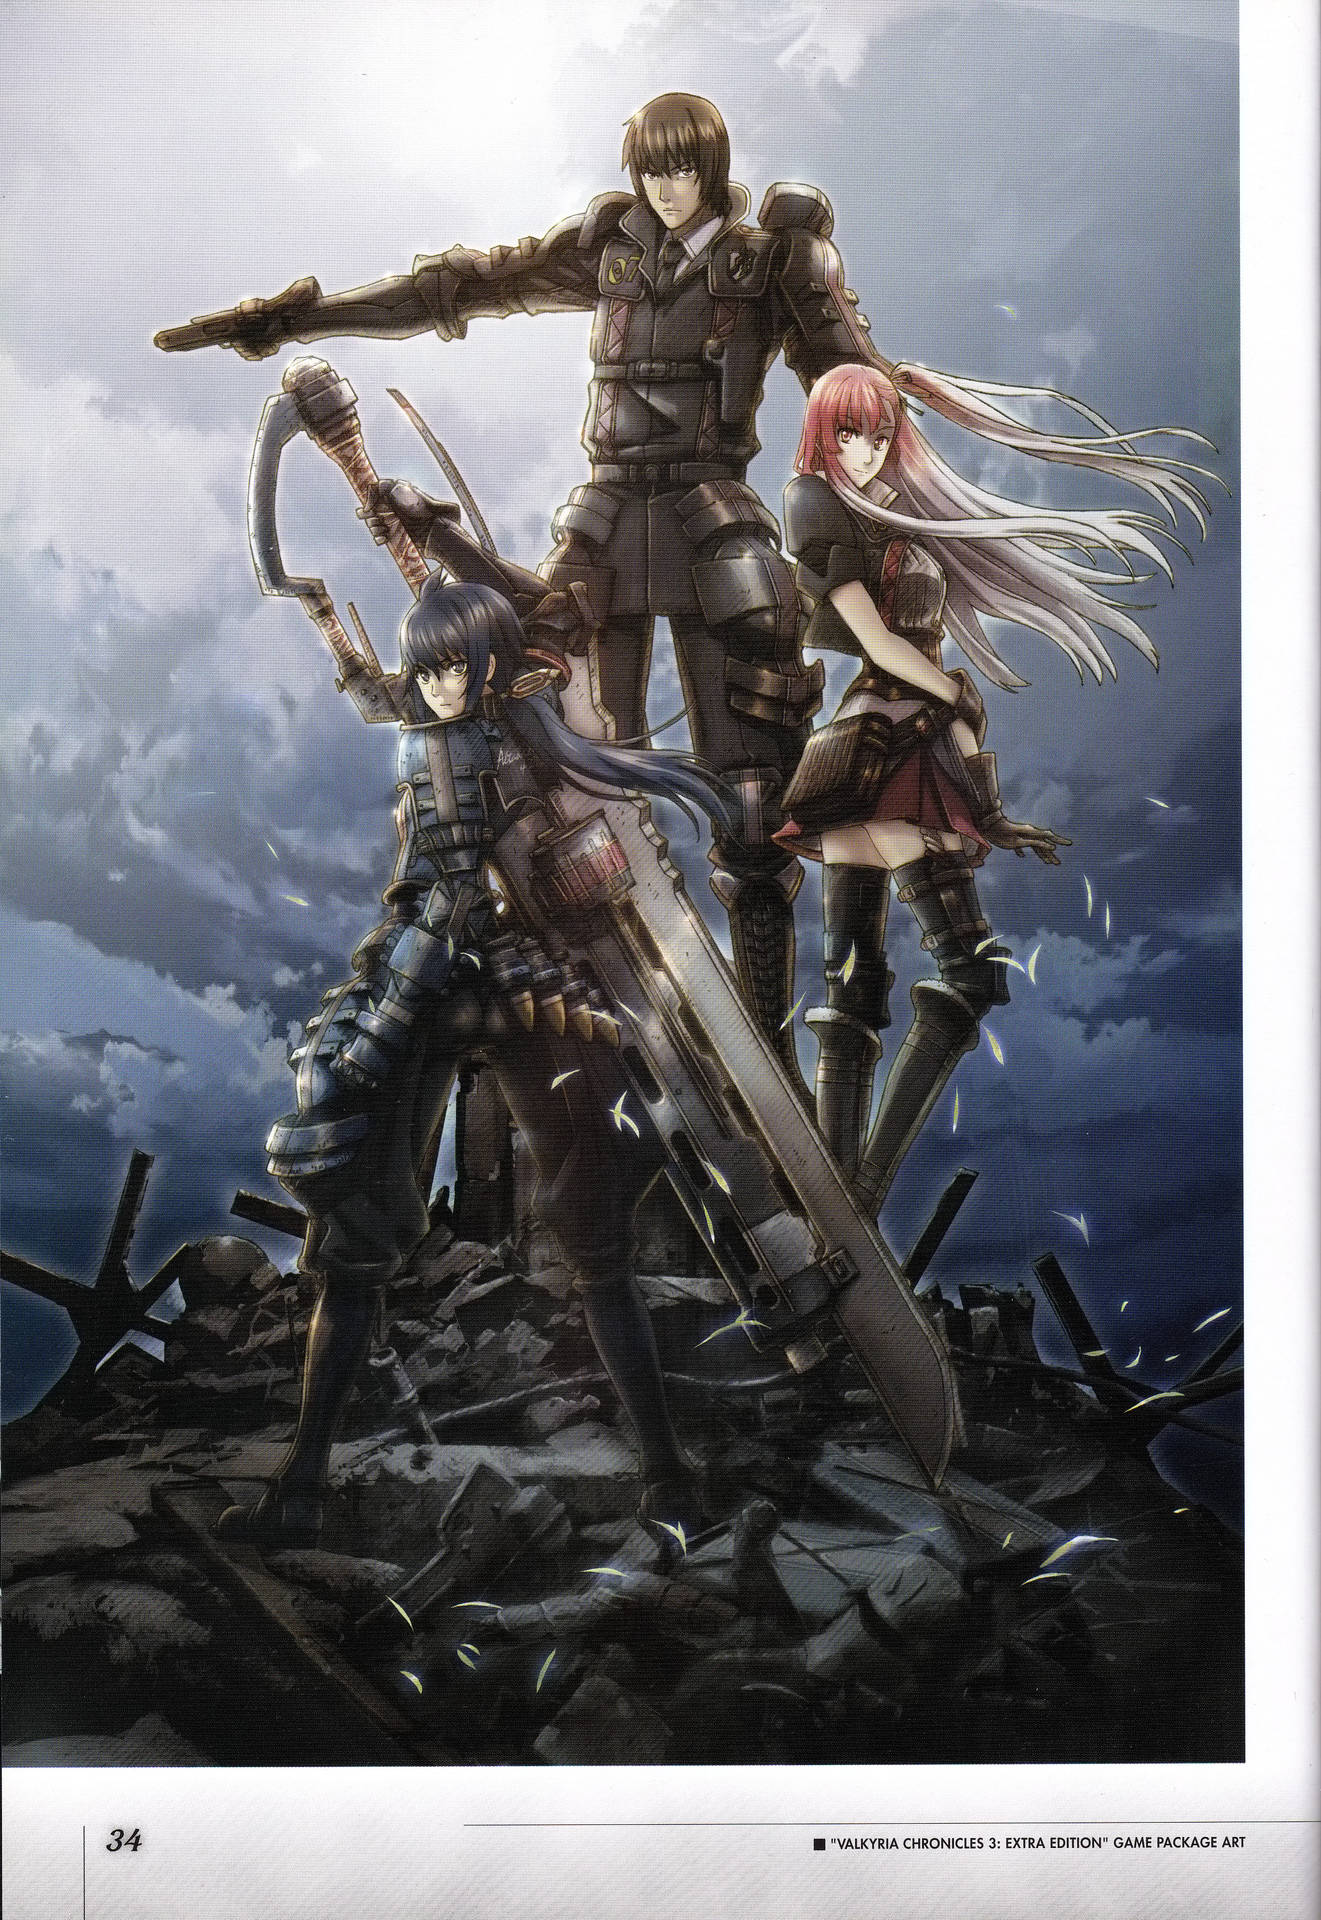 Fantastic Valkyria Chronicles Poster